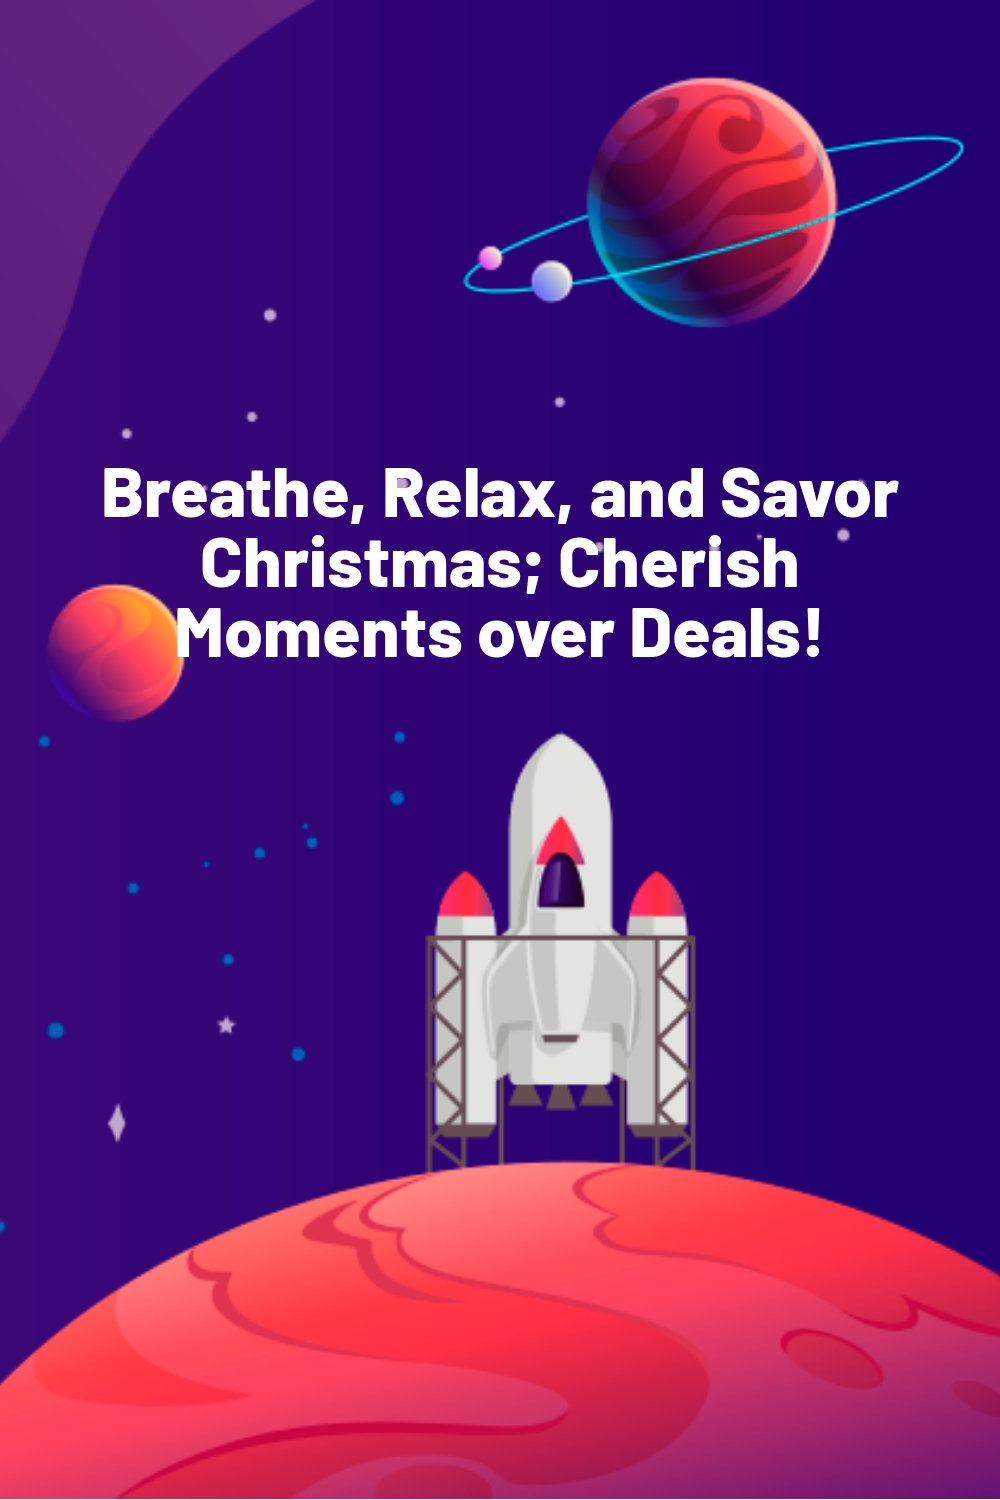 Breathe, Relax, and Savor Christmas; Cherish Moments over Deals!